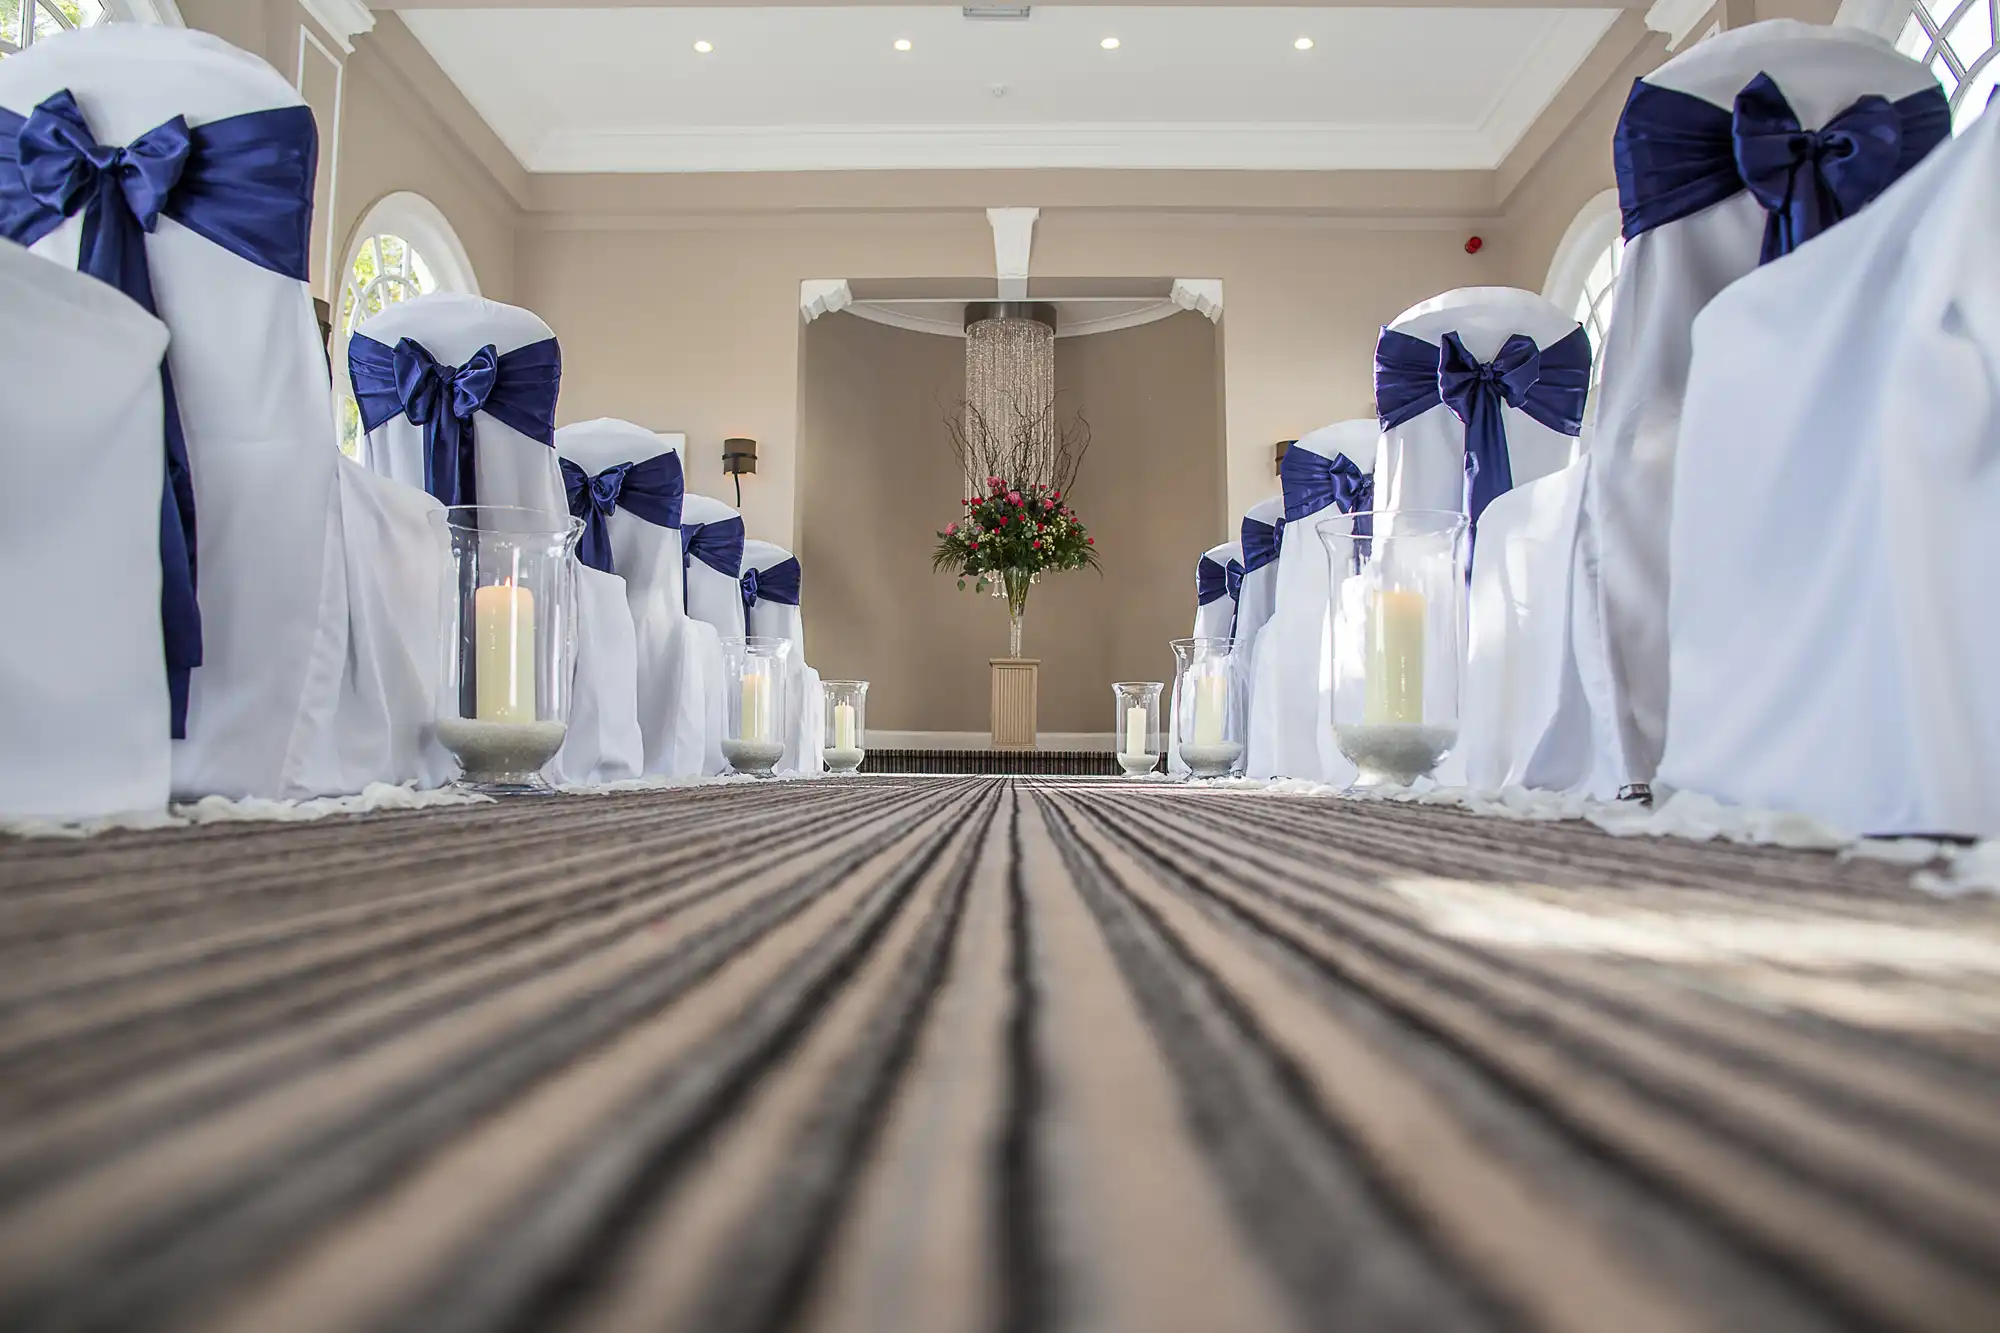 Aisle in a wedding hall decorated with white chairs adorned with large blue bows, and lined with candles on the floor leading to a flower arrangement at the altar.